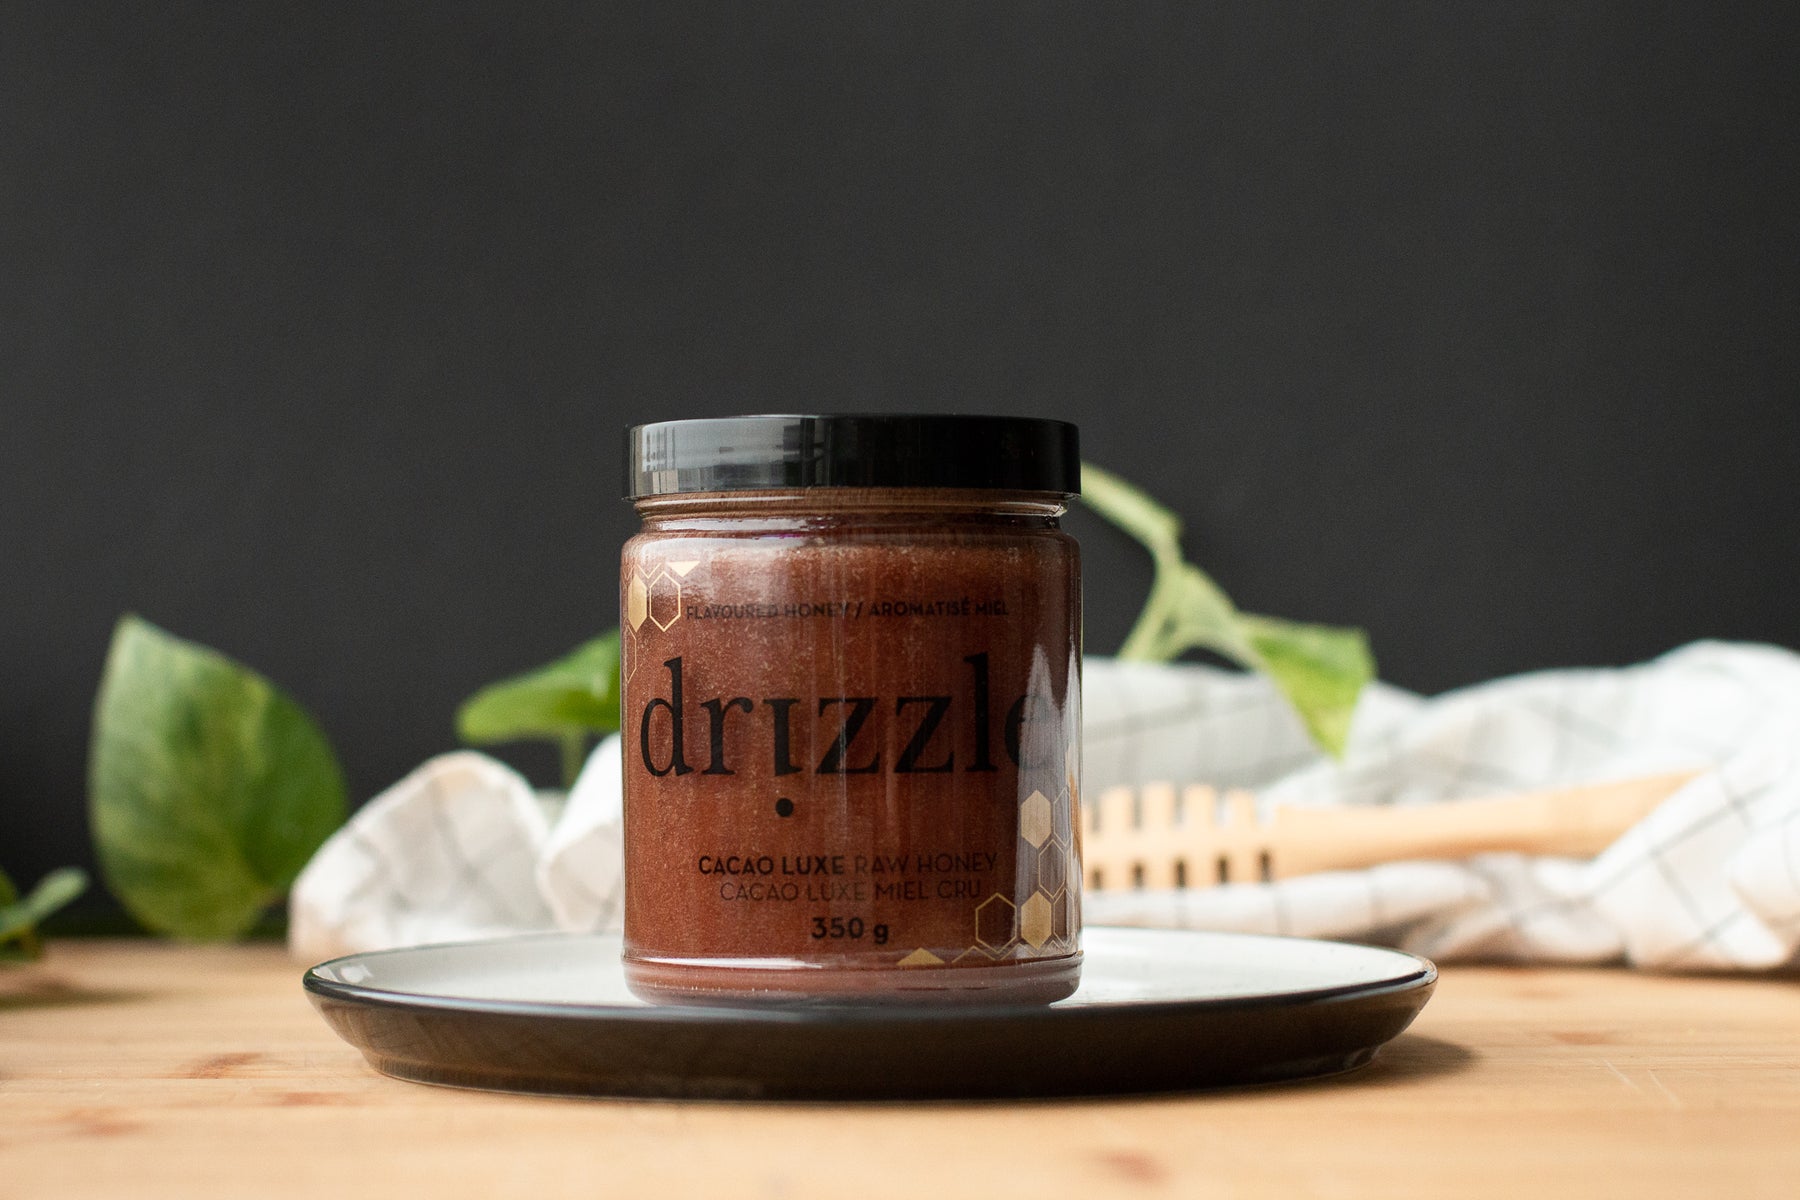 Photo of Drizzle Cacao Luxe Honey in a kitchen setting.